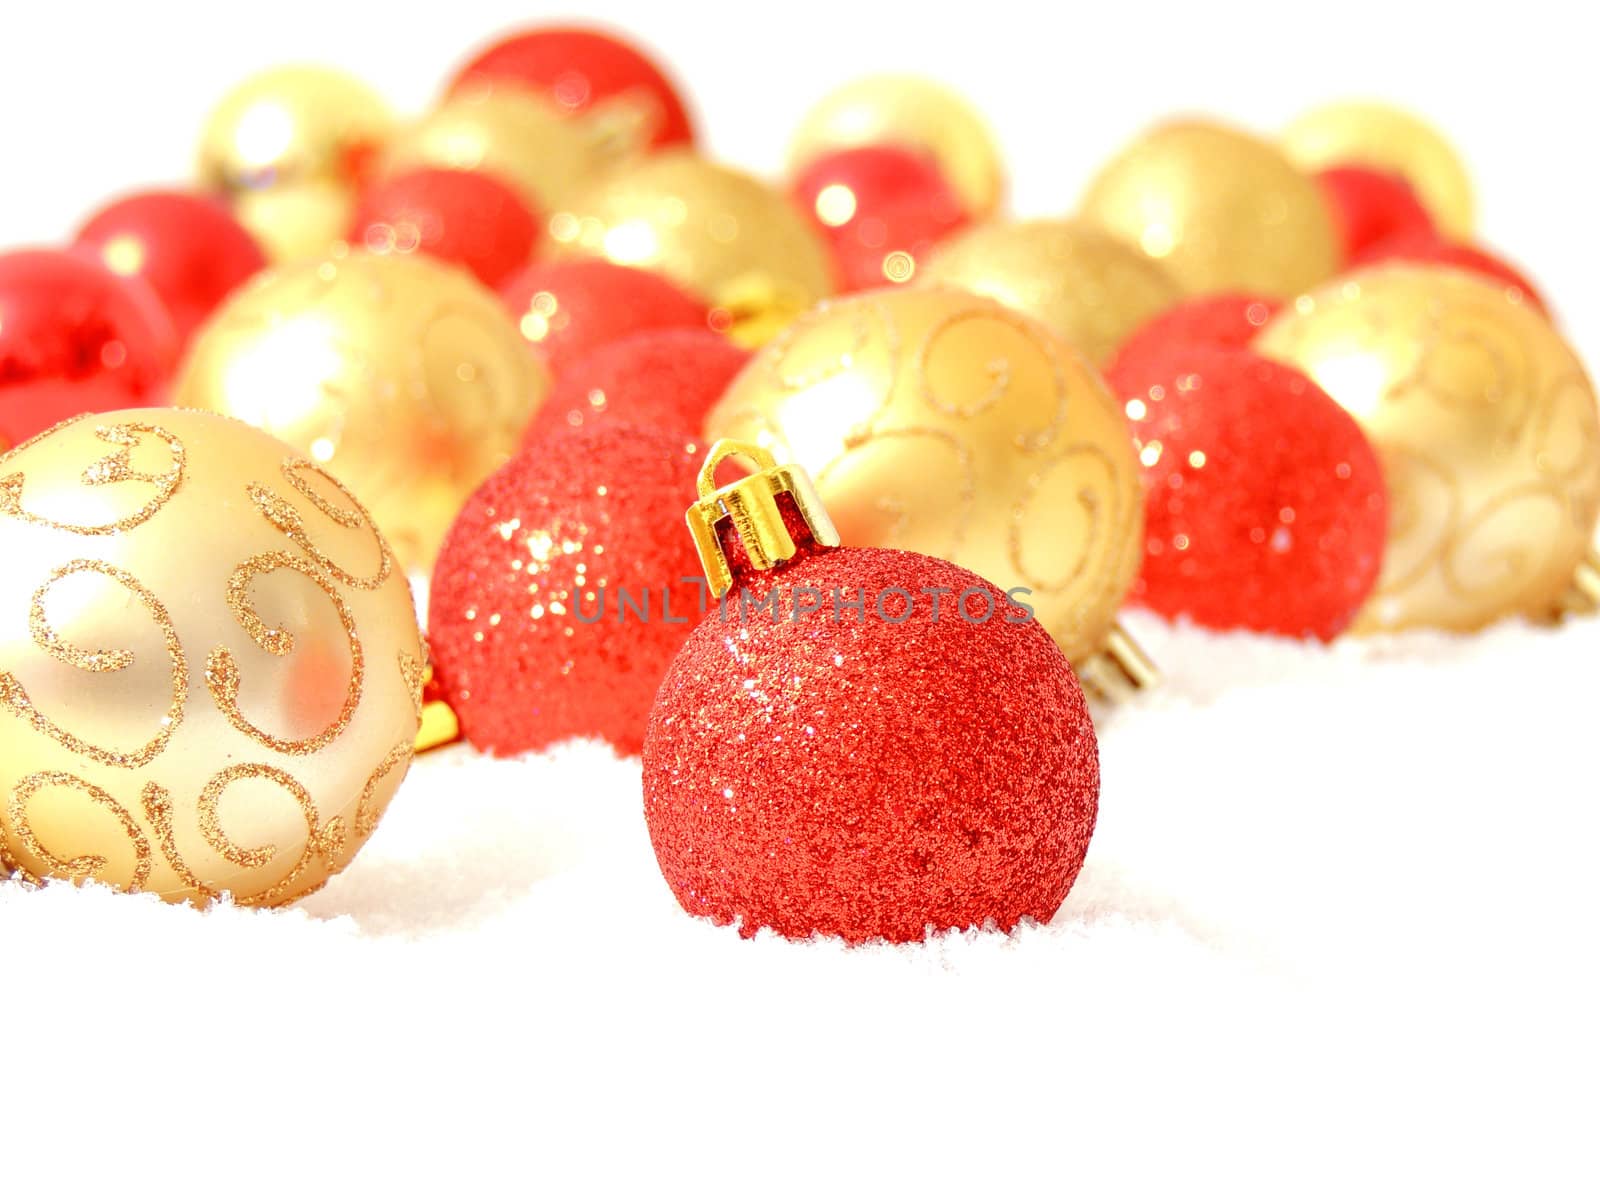 Red and gold Christmas balls by mereutaandrei